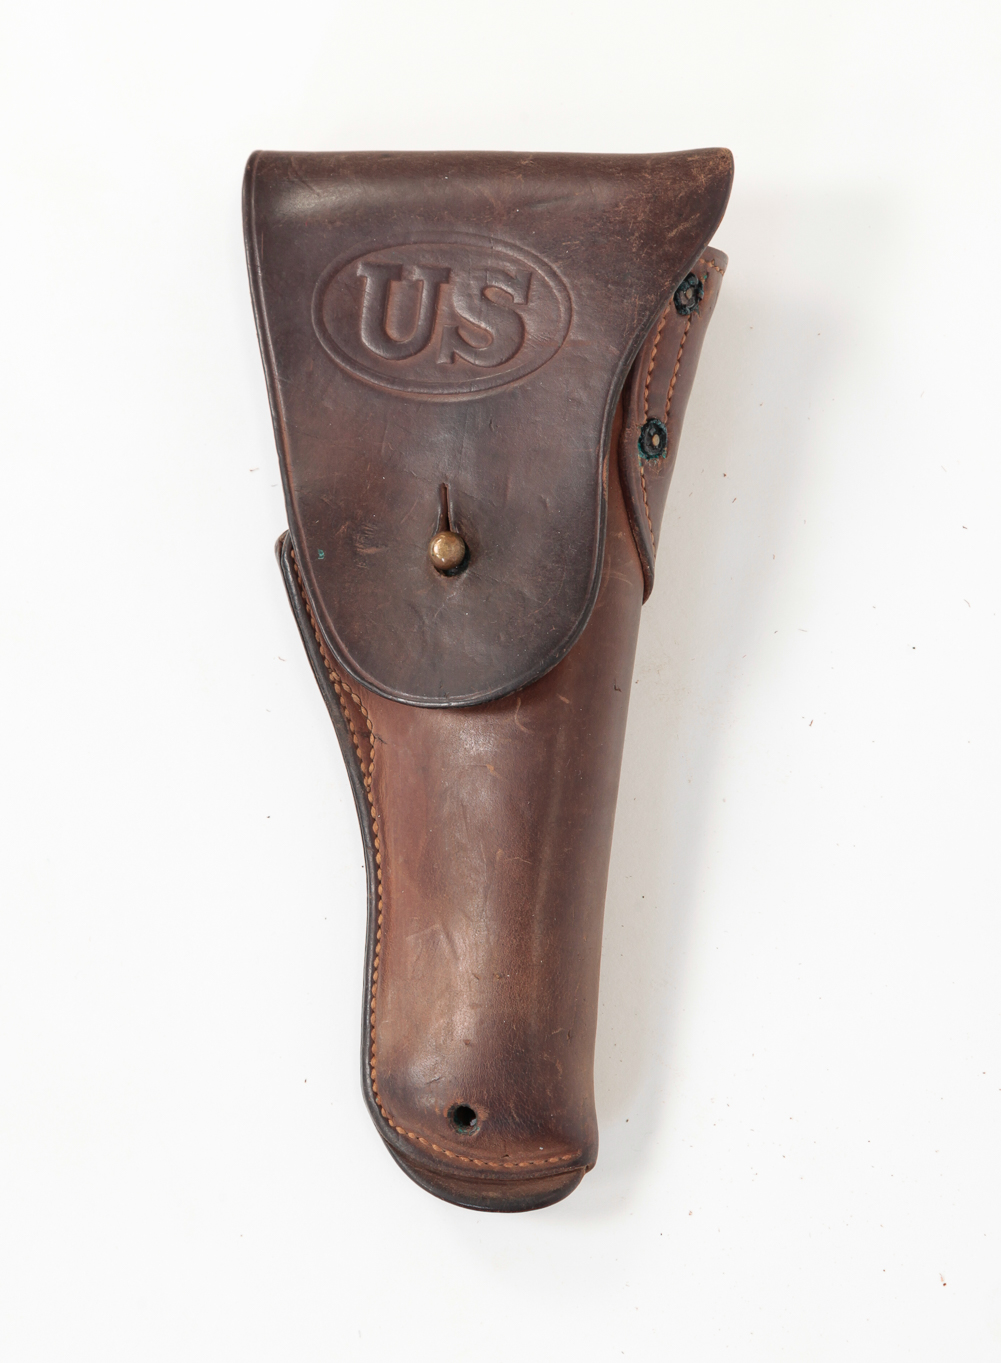 CLINTON 1913 U.S. LEATHER HOLSTER